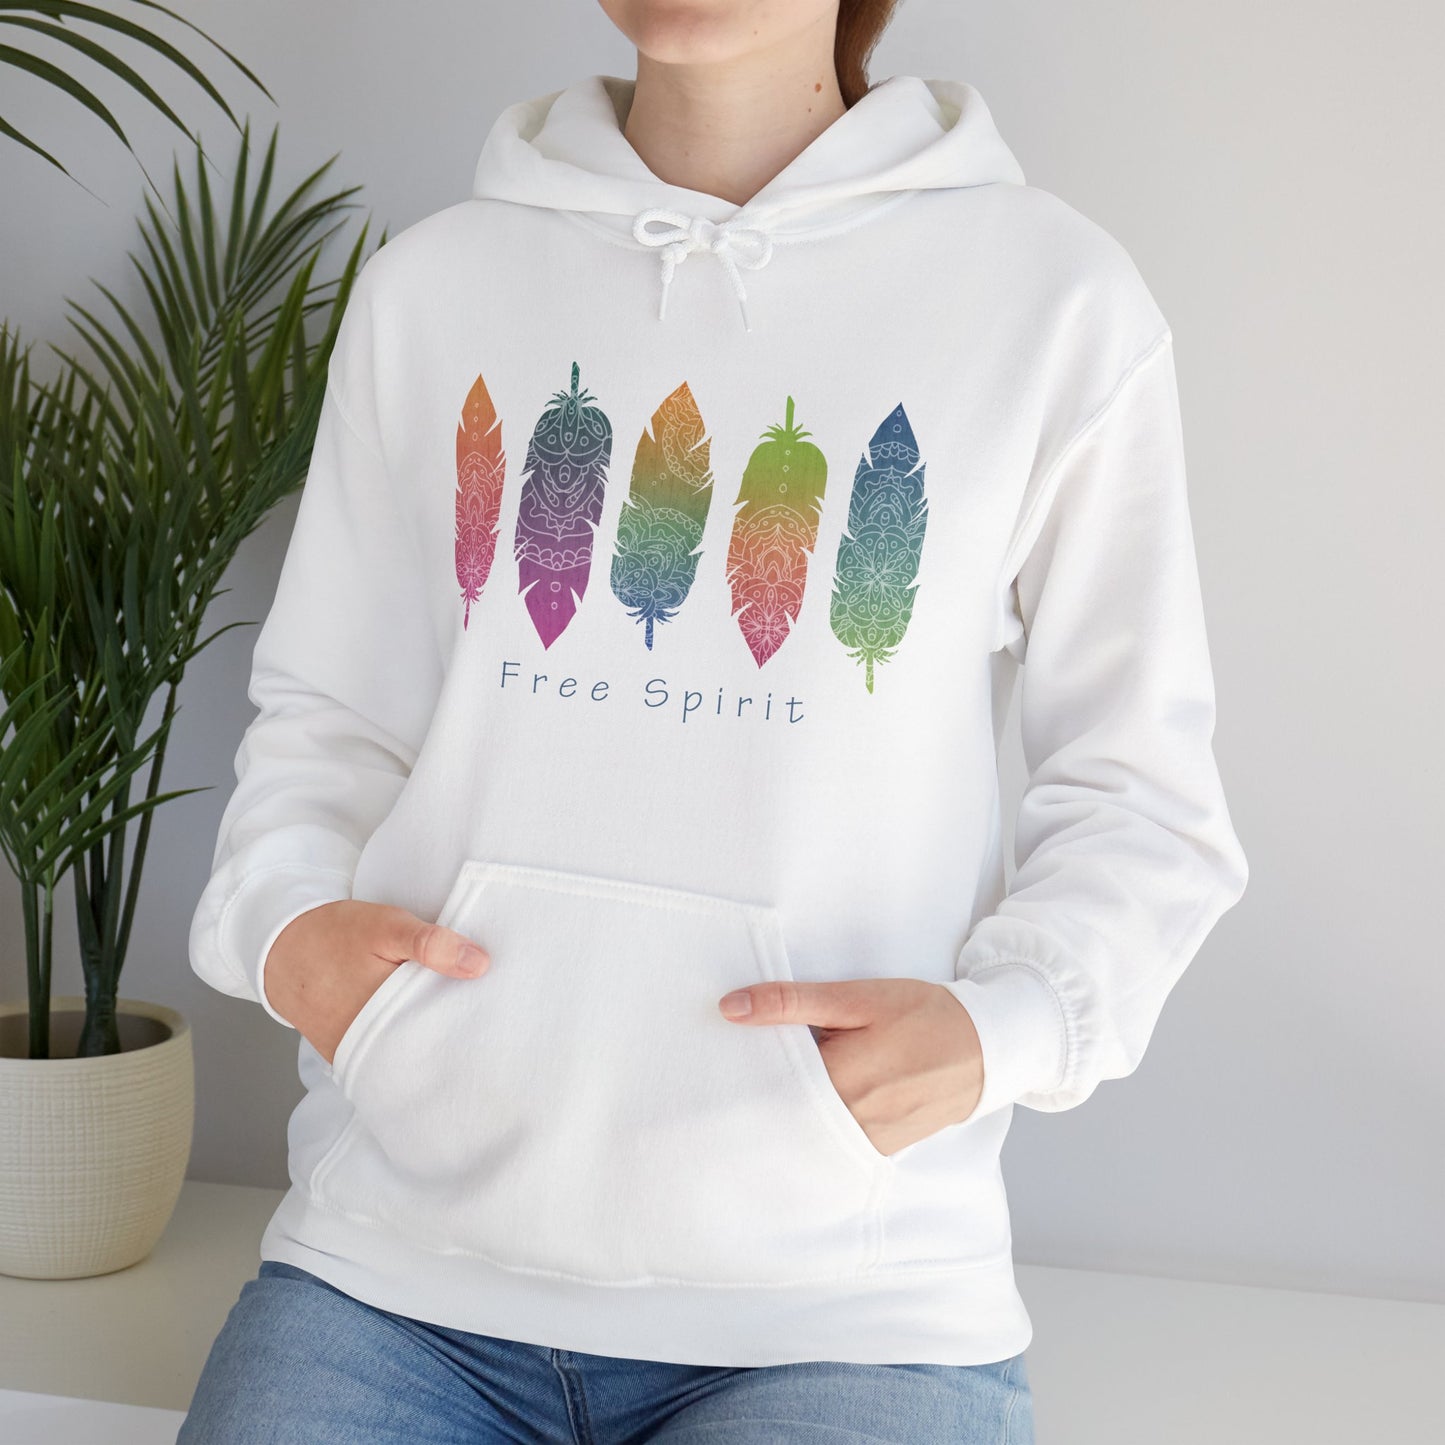 Free Spirit Hooded Sweatshirt For Motivational Hoodie For Freedom Sweatshirt For Spiritual Gift For Woman